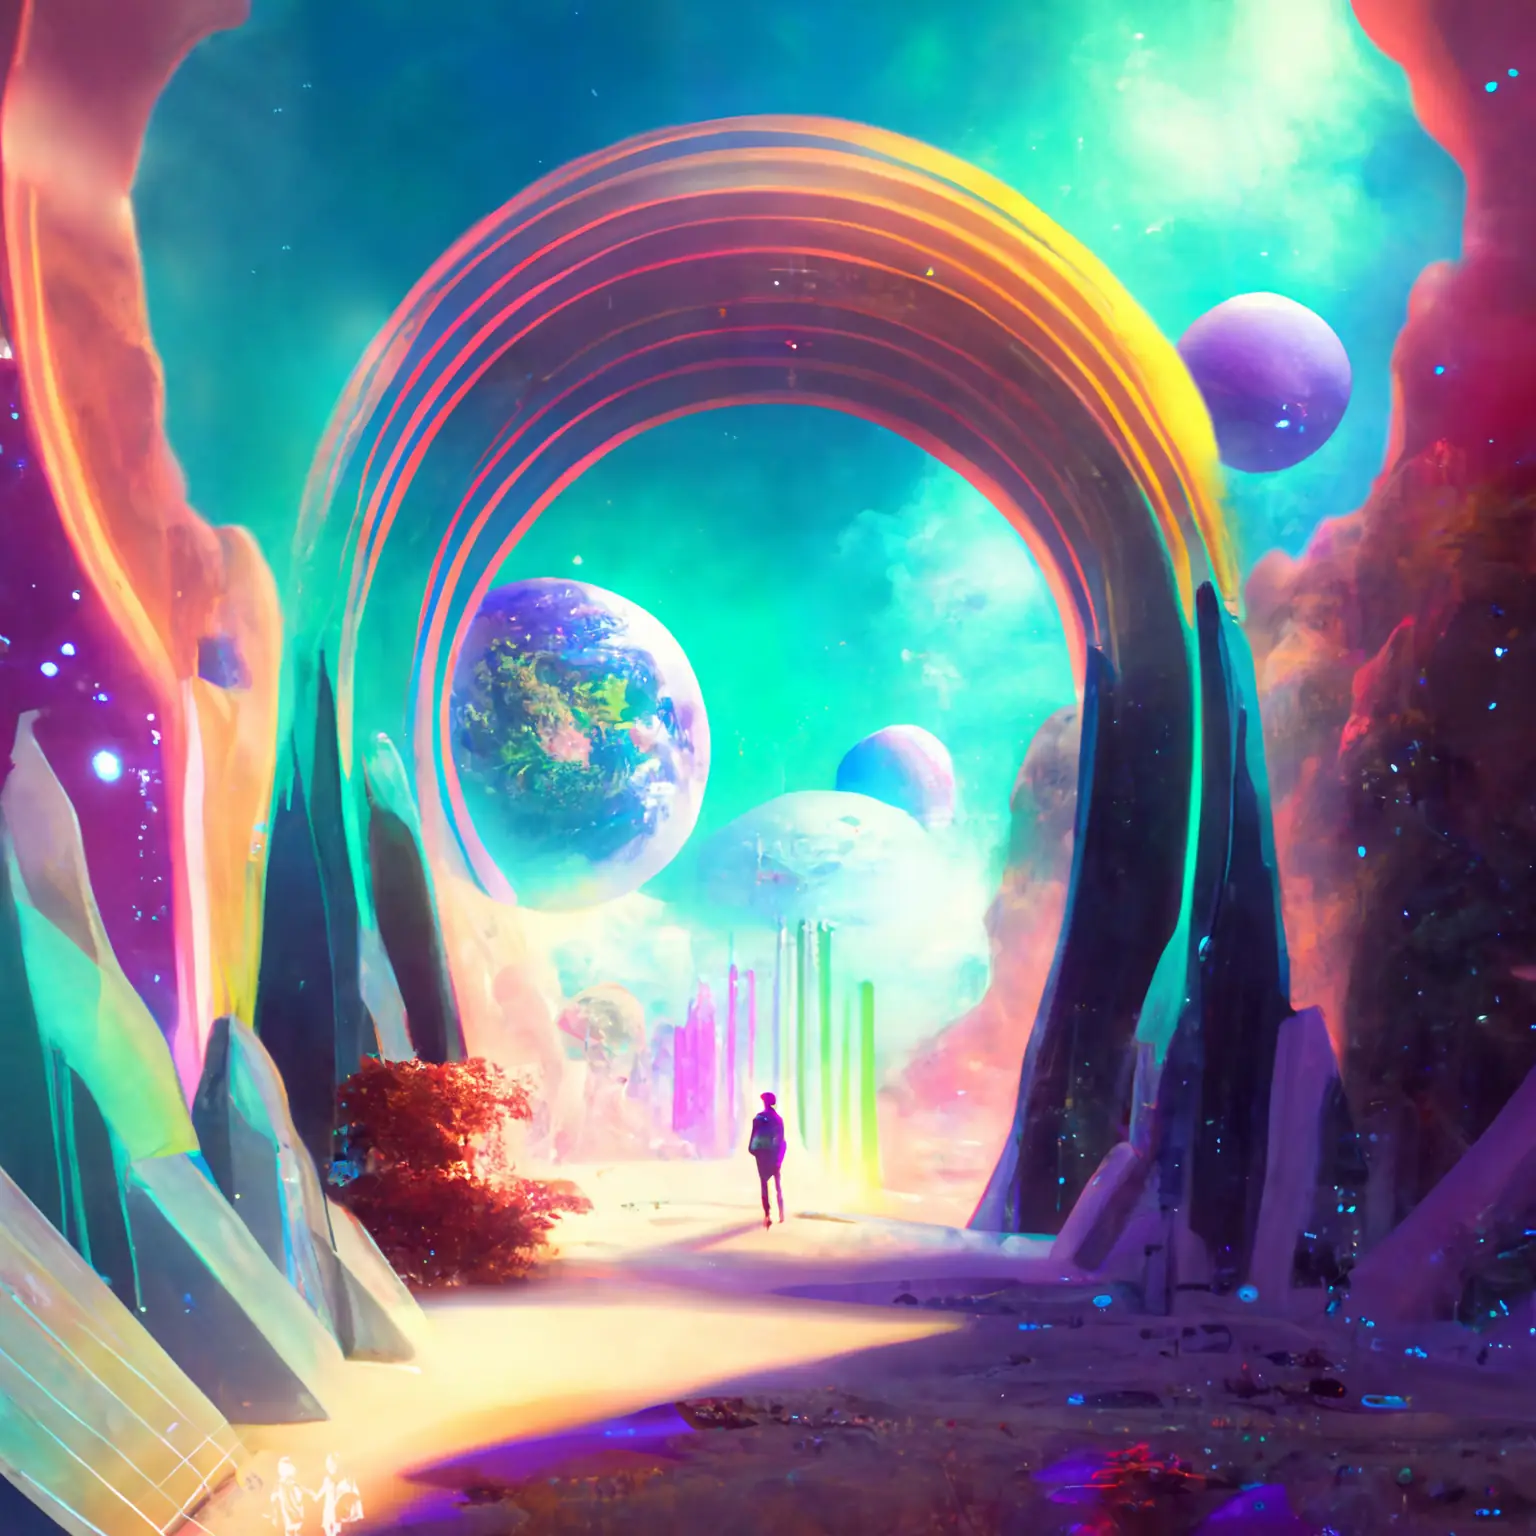 A colourful artistic rendering of a person standing under an arch looking out onto worlds.